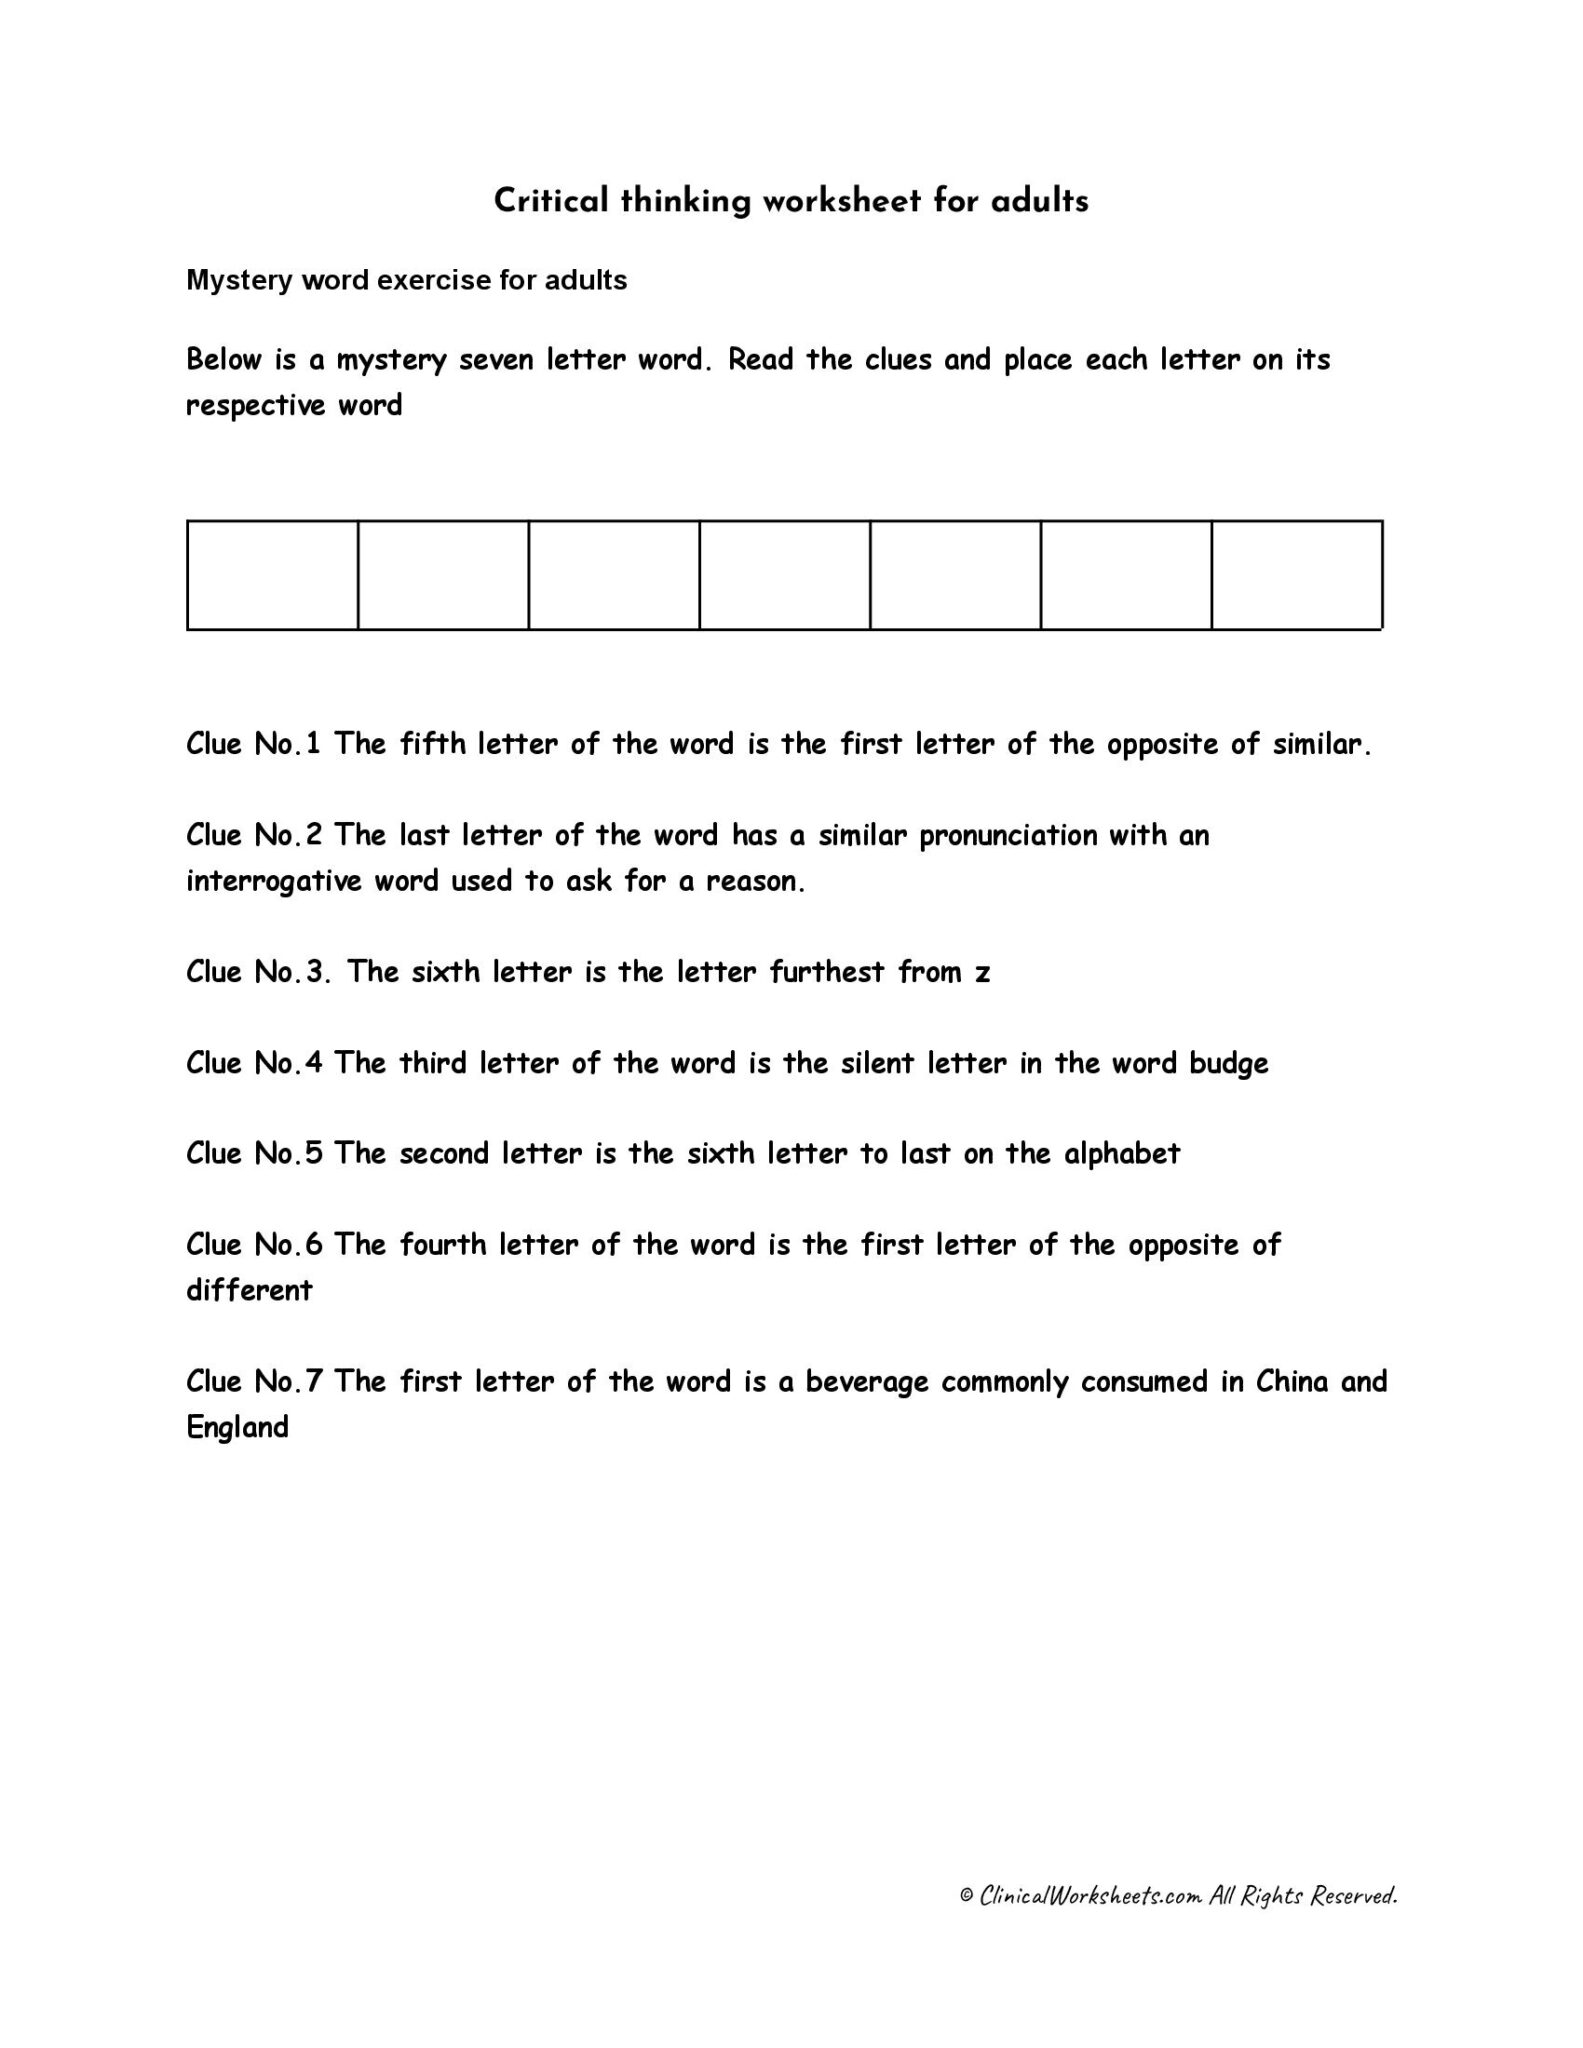 Critical Thinking Worksheet For Adults Clinical Worksheets